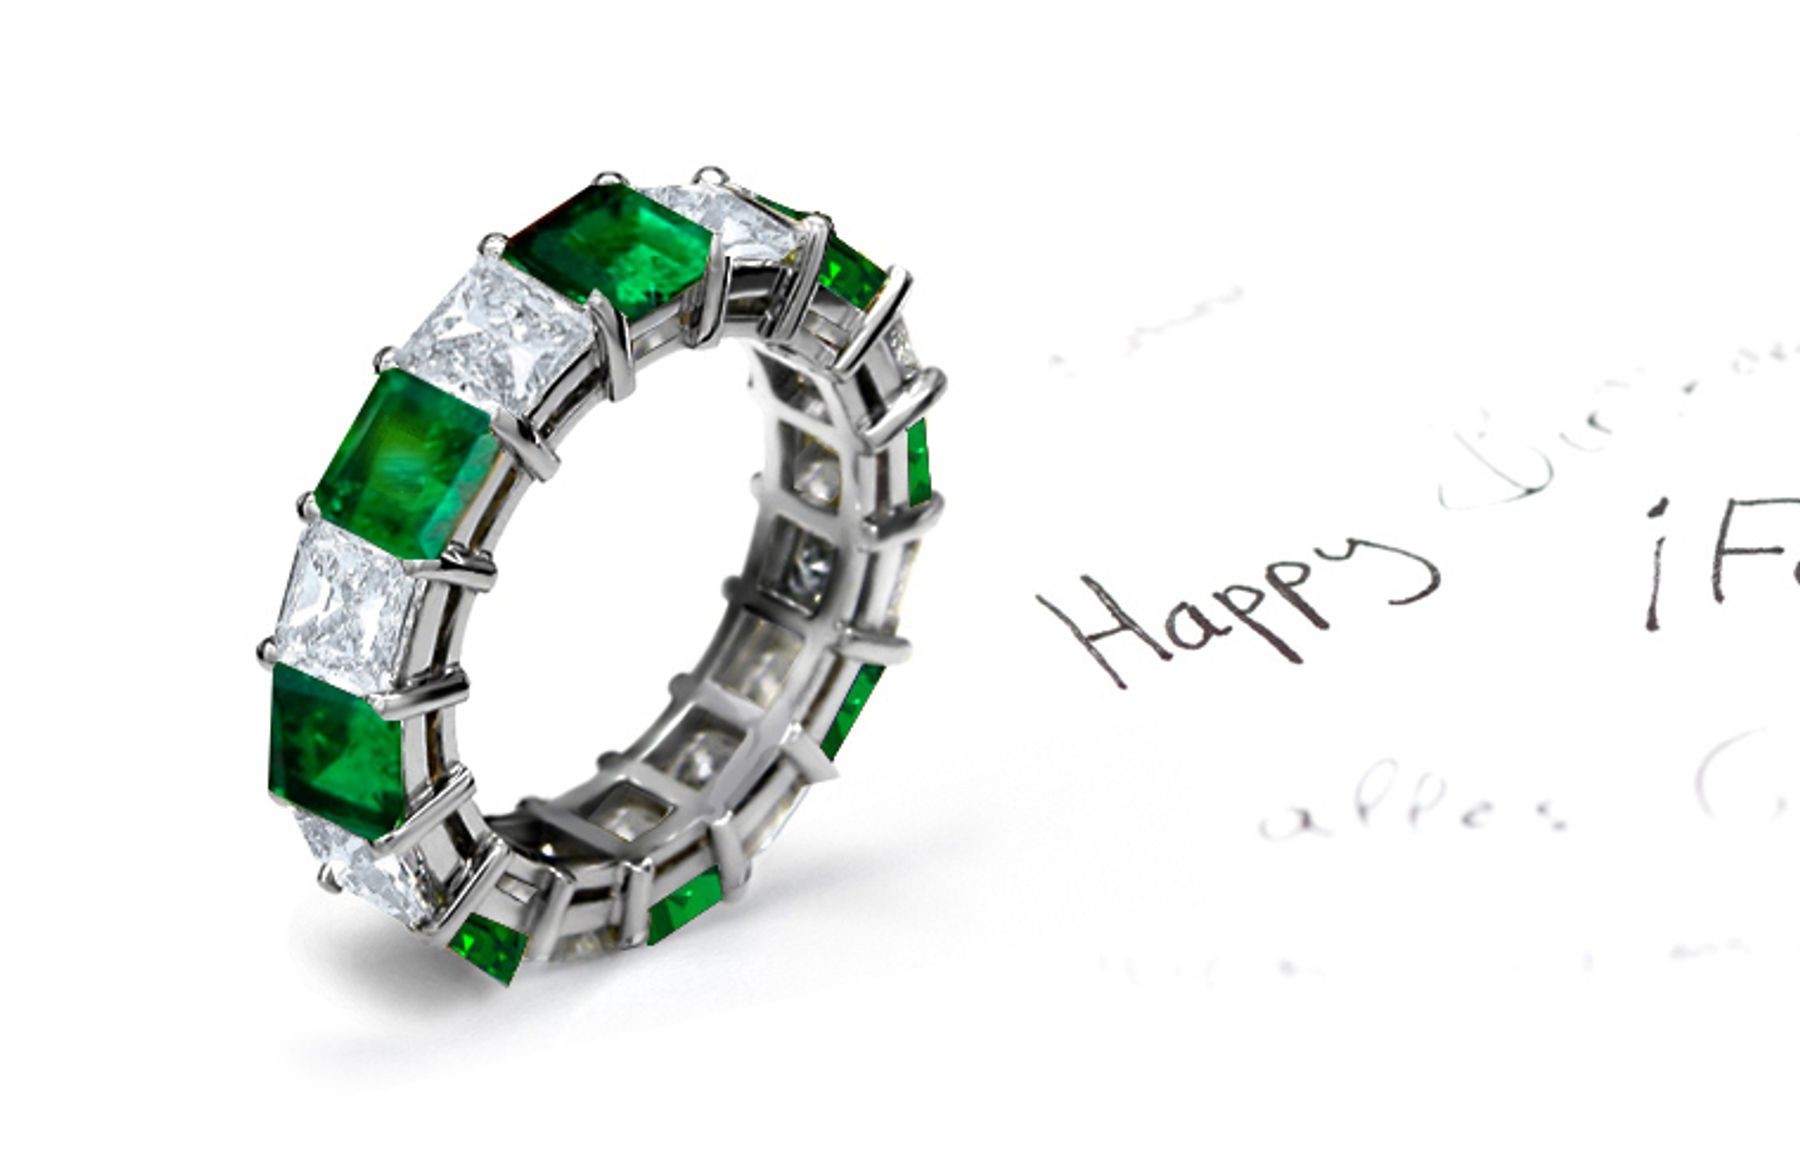 Emerald Ladies Eternity Rings: Vibrant Green Emerald Square and Princess Cut Diamonds 1.0 CTTW 4-Prong Set Ring in Yellow Gold.